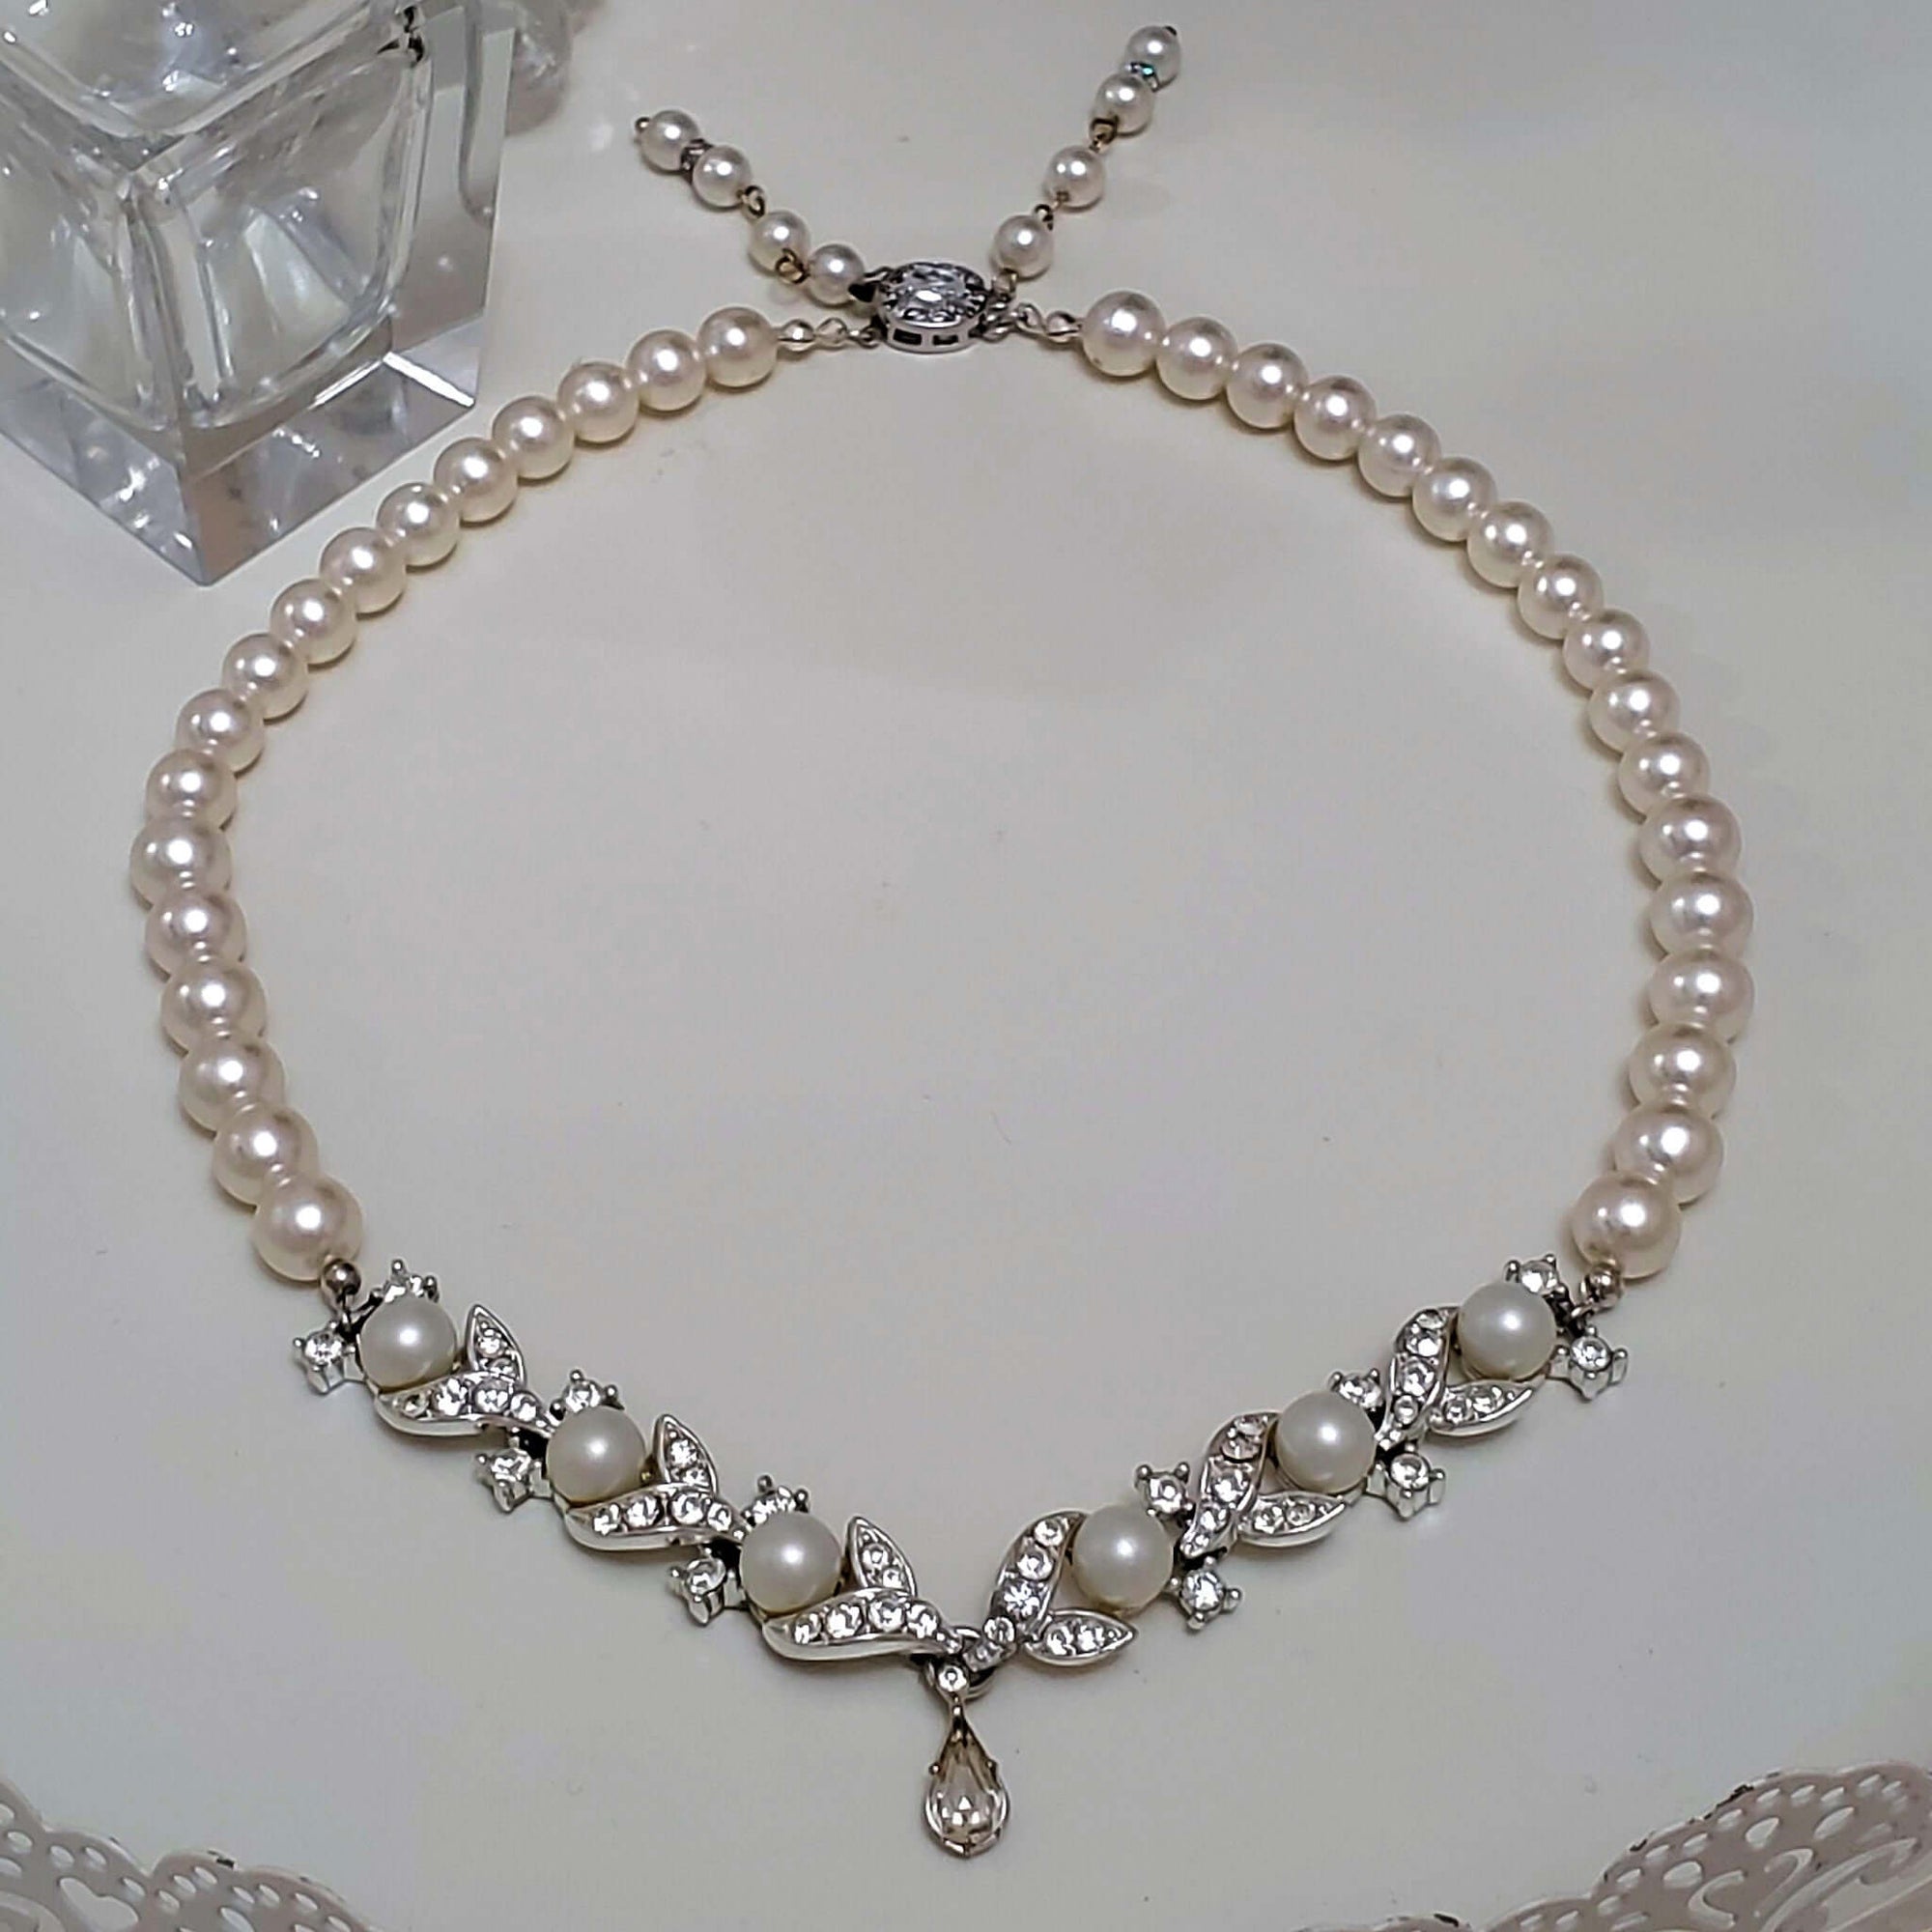 Vintage Bridal Pearl Necklace with Crystal Pendant